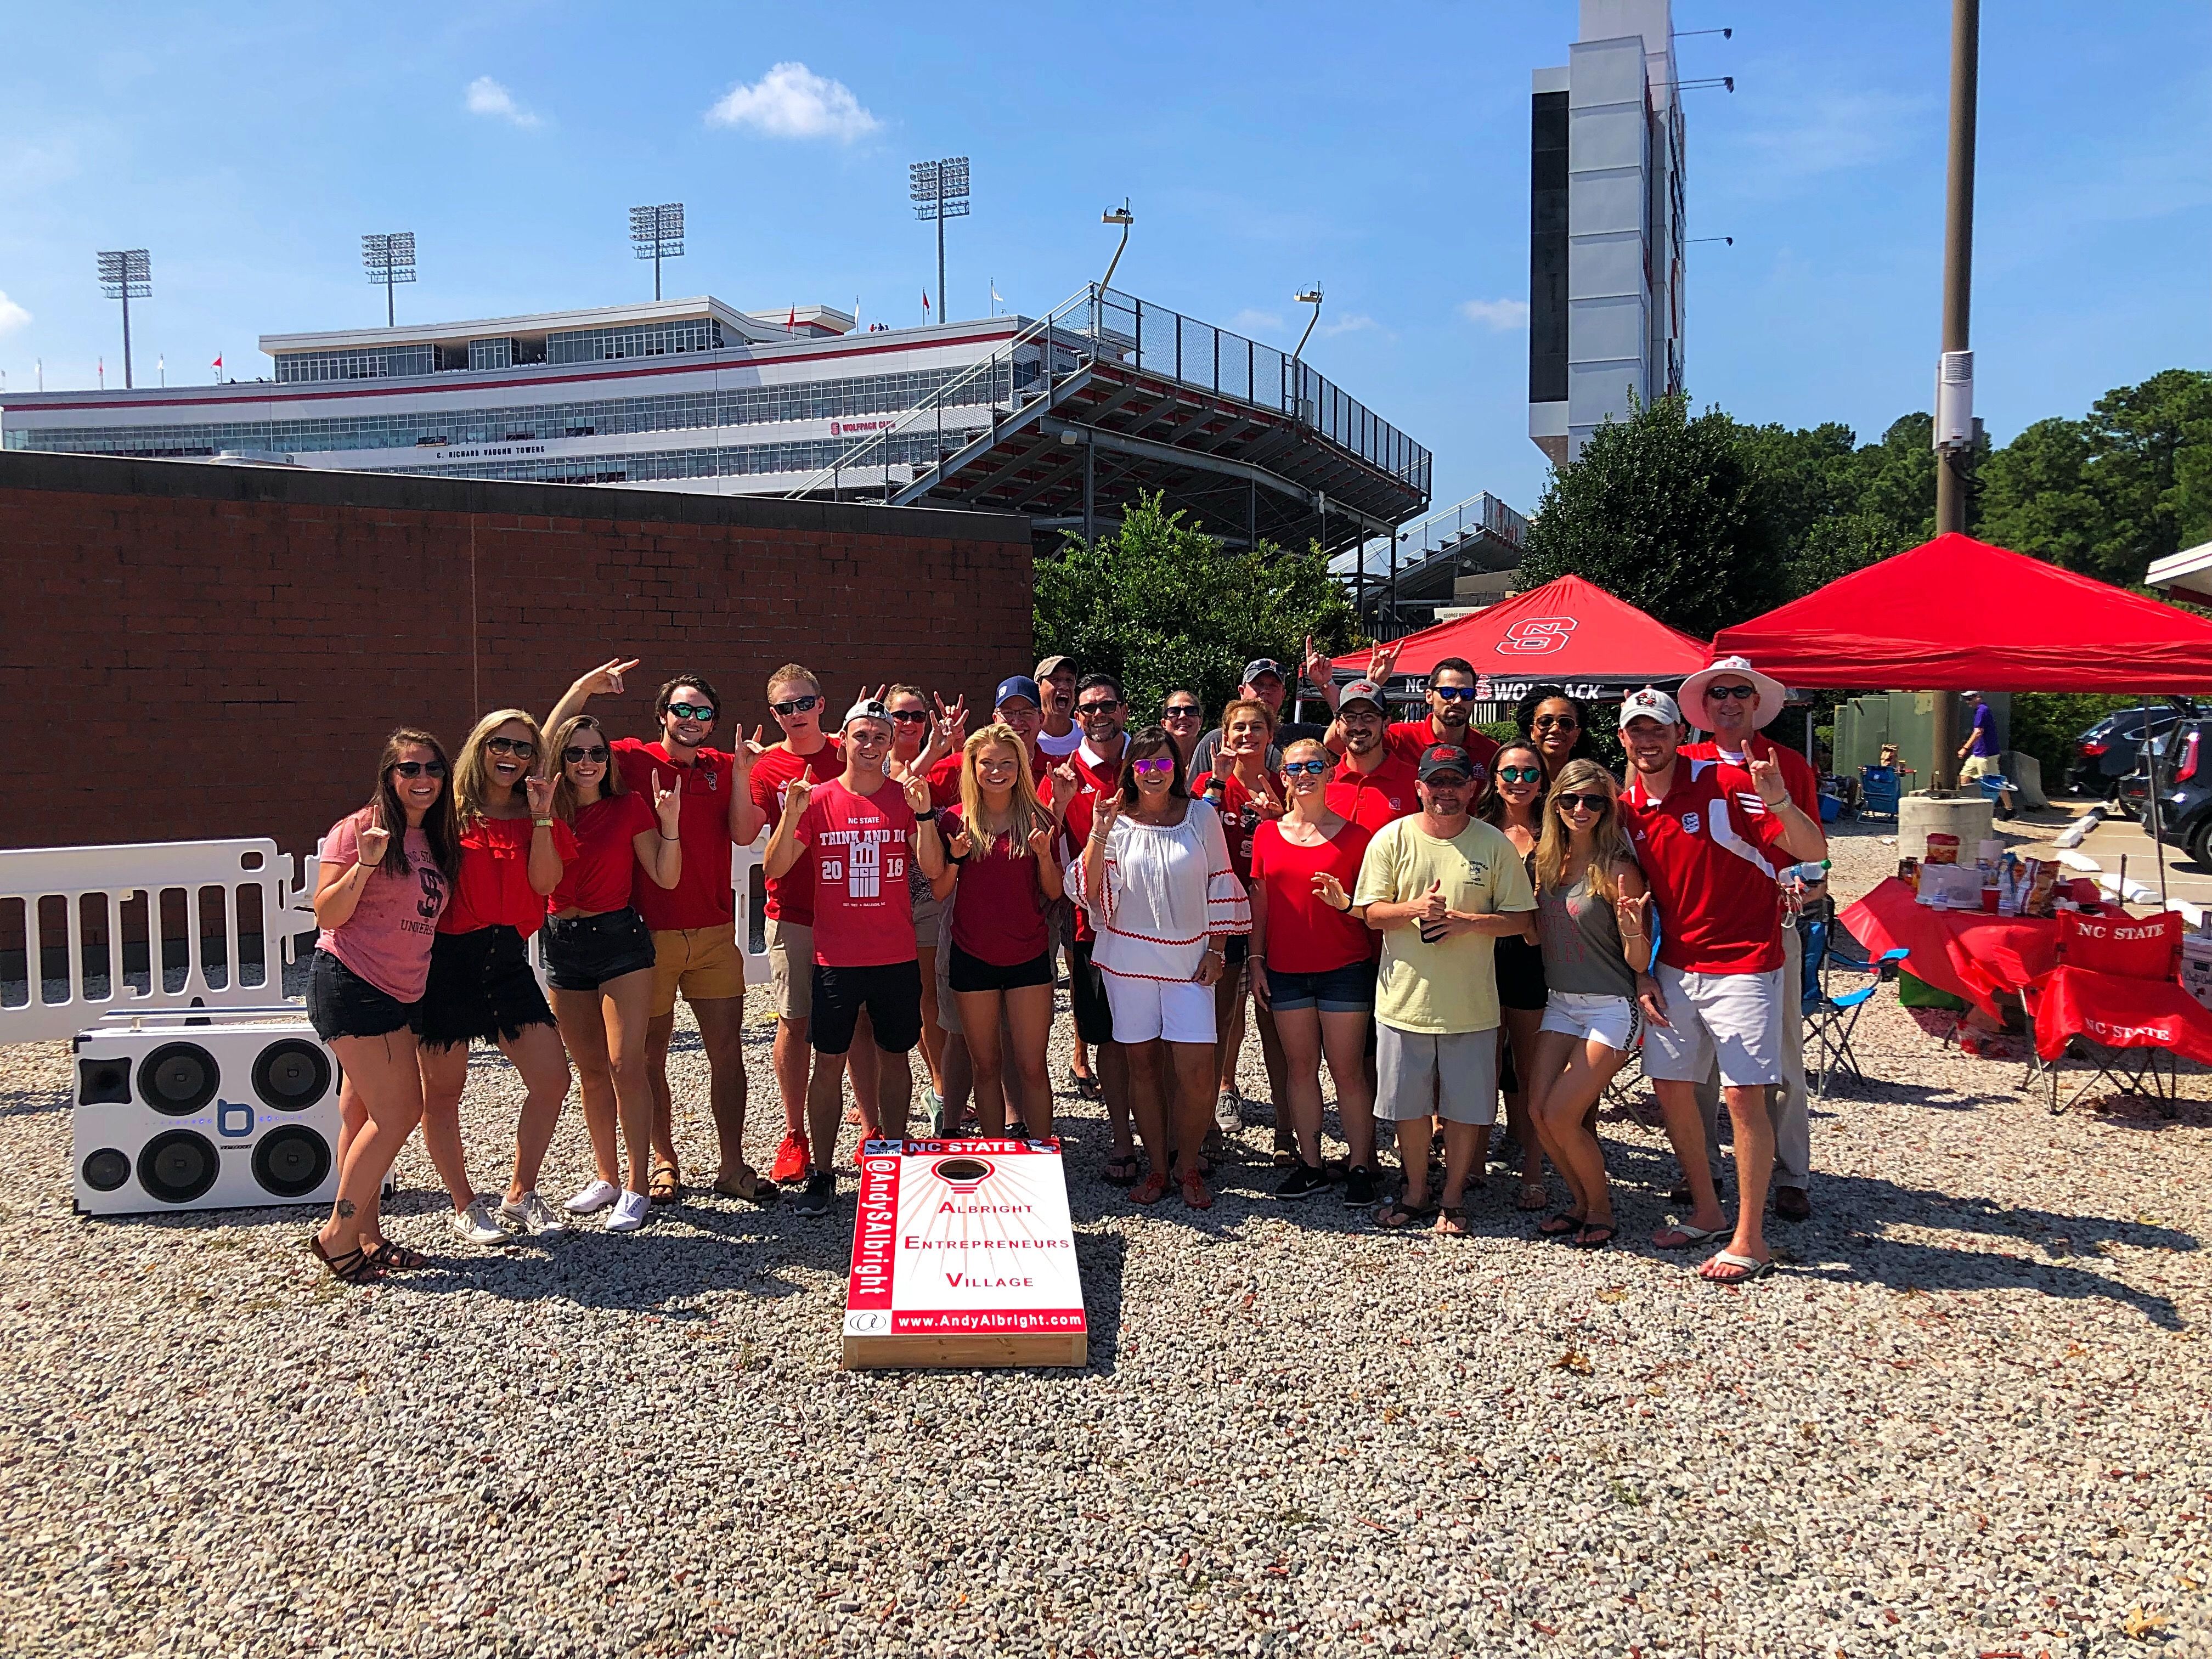 Members of The Alliance pose for a photo before heading to the NC State football game to witness the official kickoff coin toss sponsored by The Alliance at NC State home games this season.